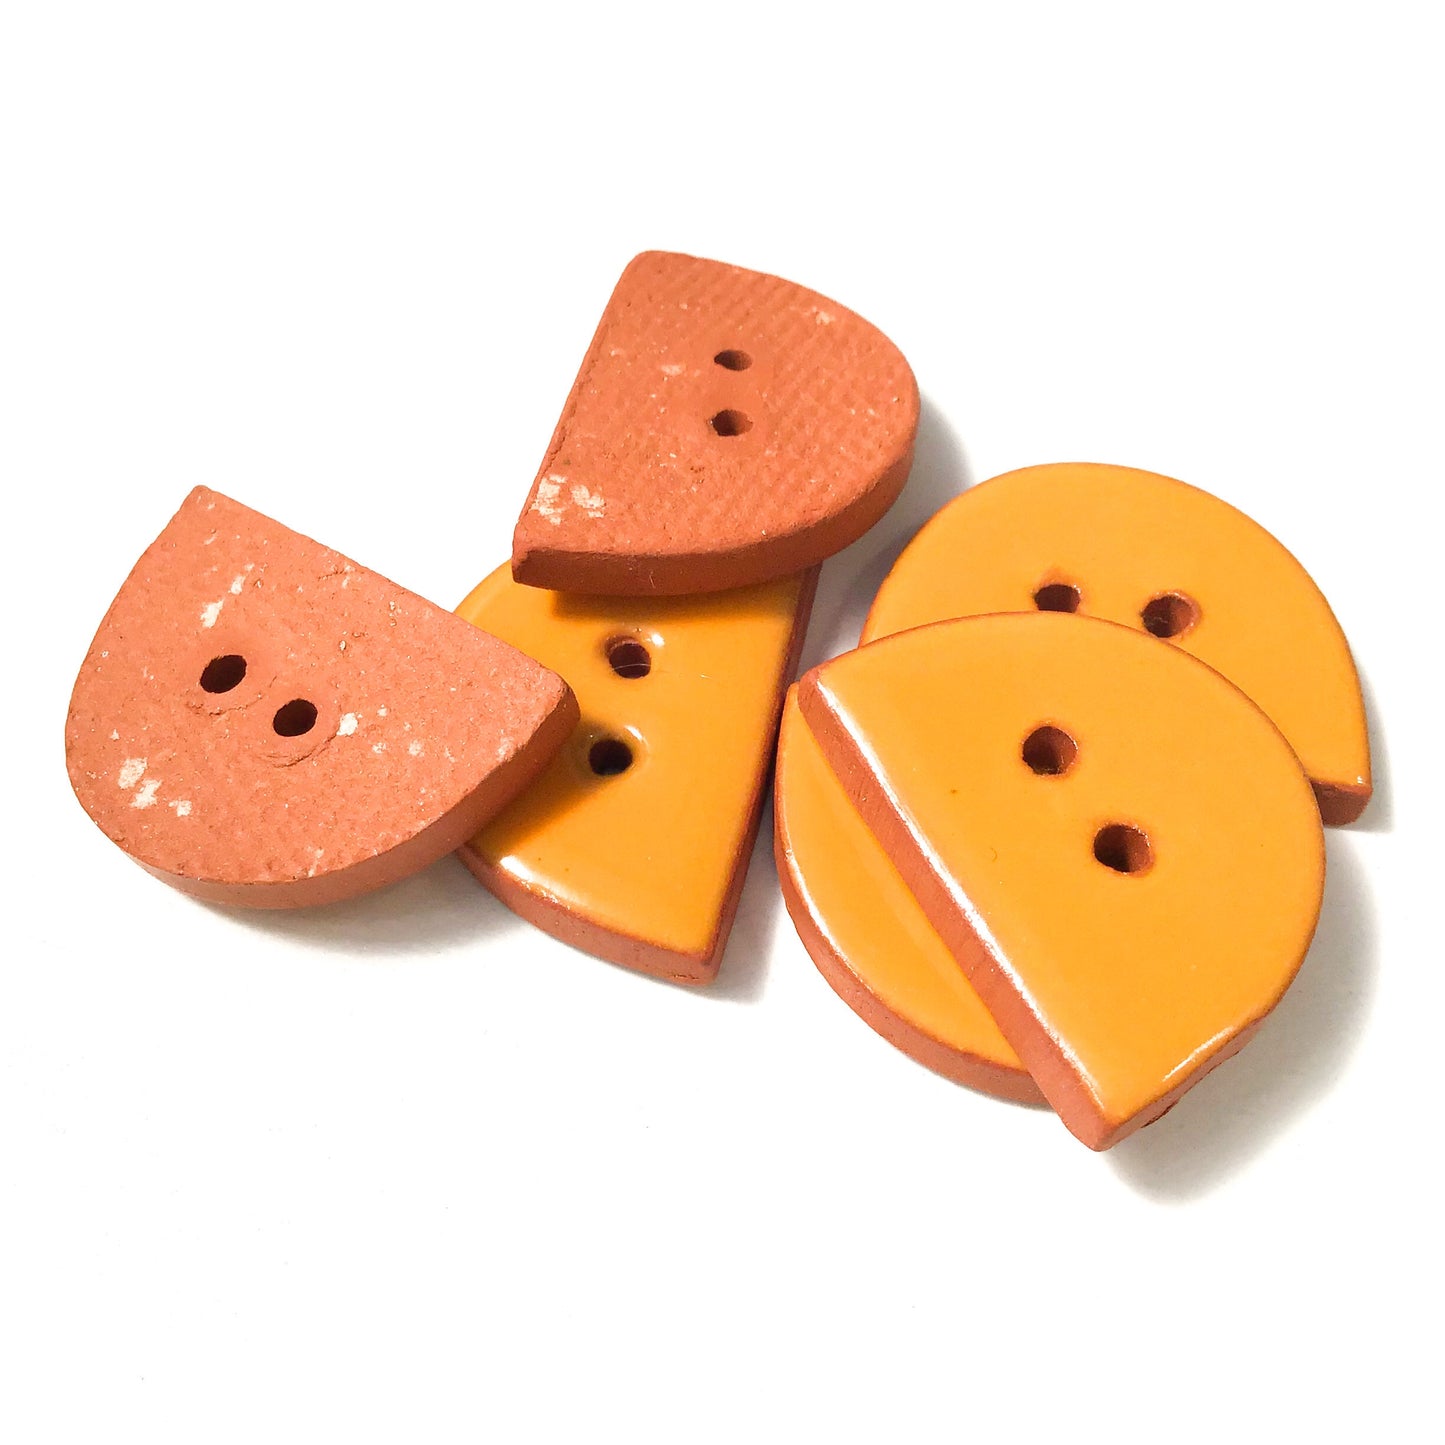 Orange Ceramic Buttons - Half Circle Clay Buttons - 5/8" x 15/16" - 6 Pack